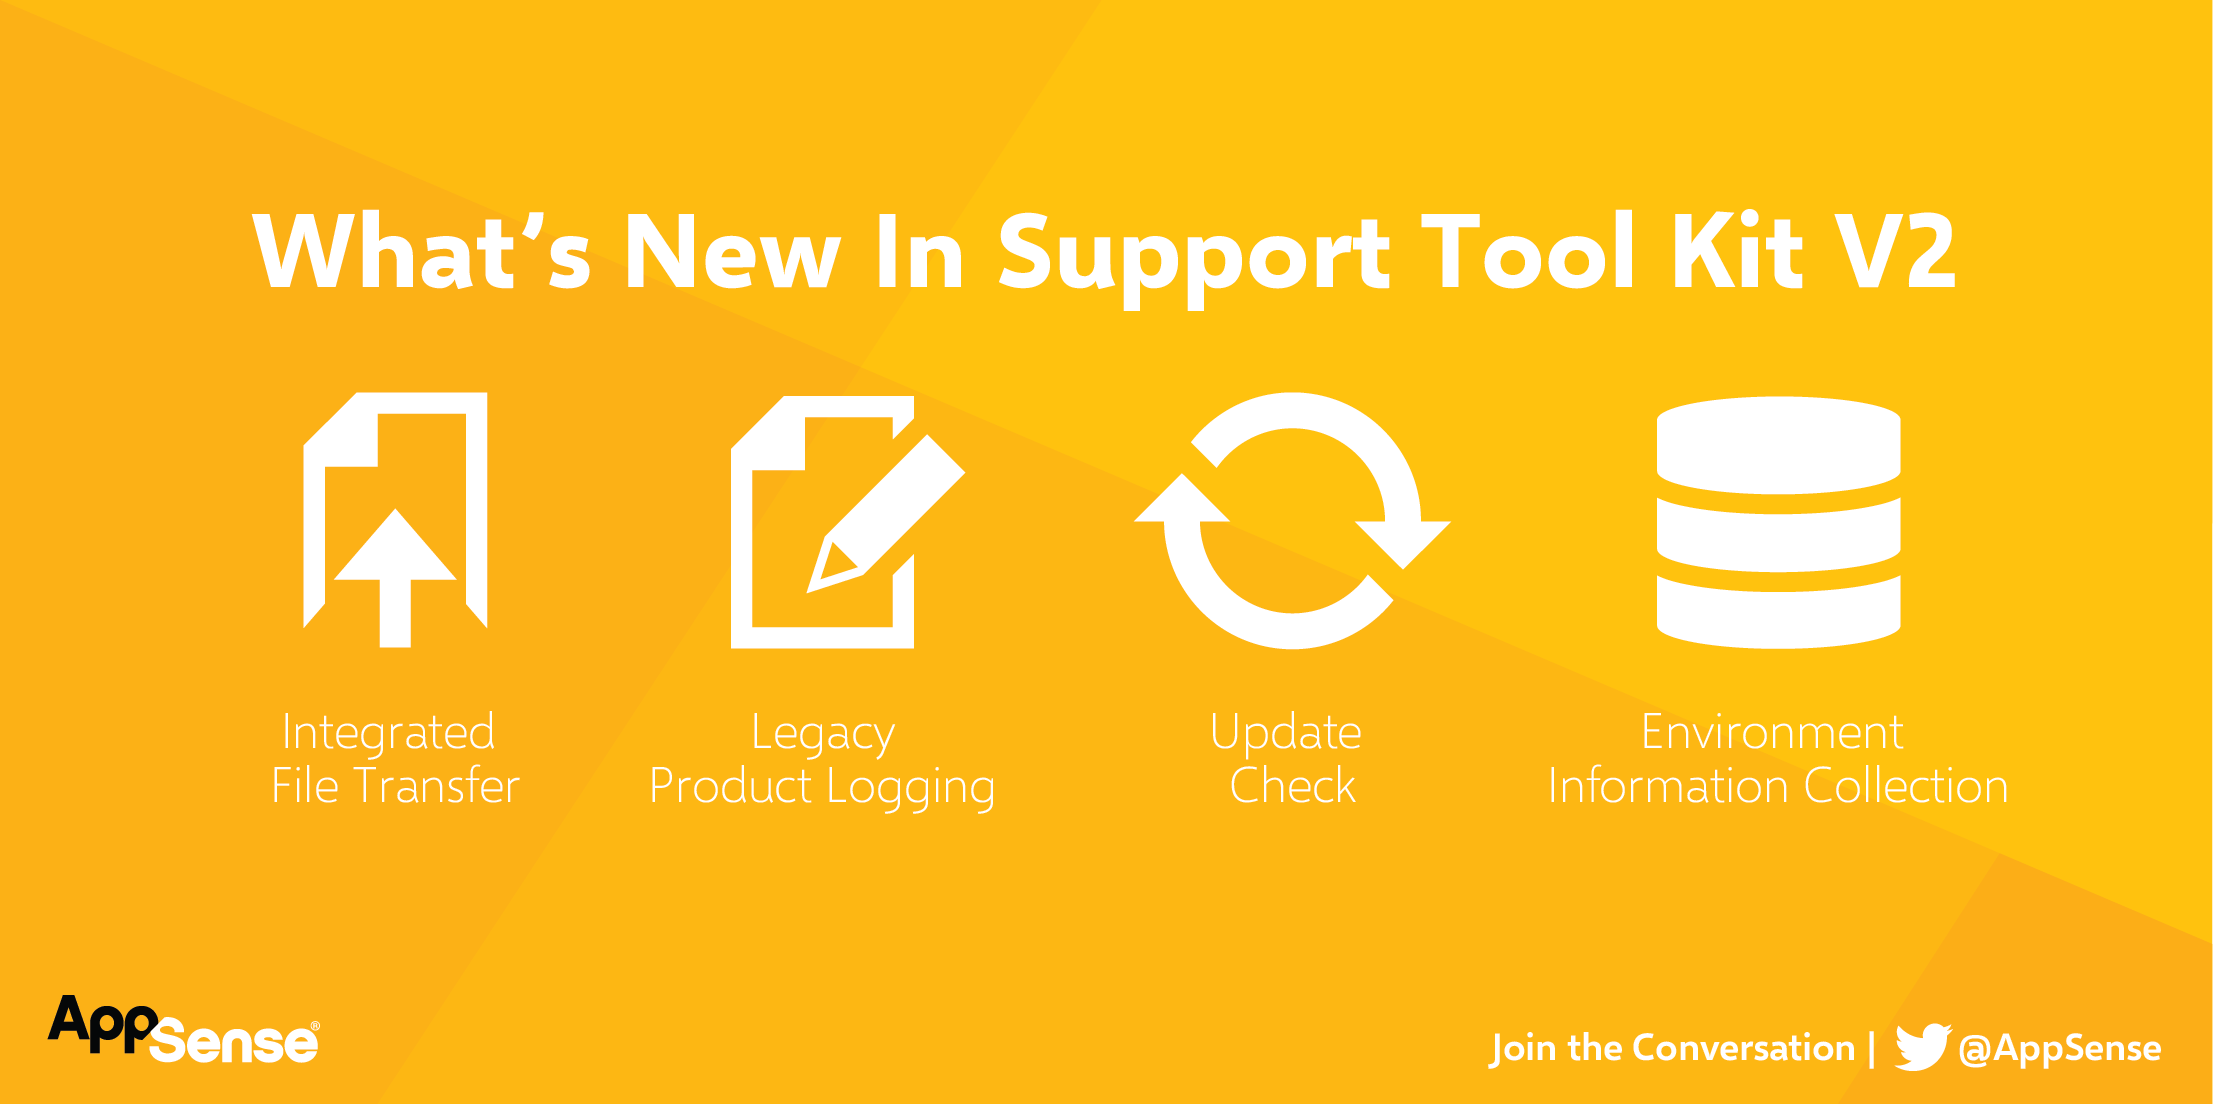 2015-10_Whats-New-In-Support-Tool-Kit-V2-01